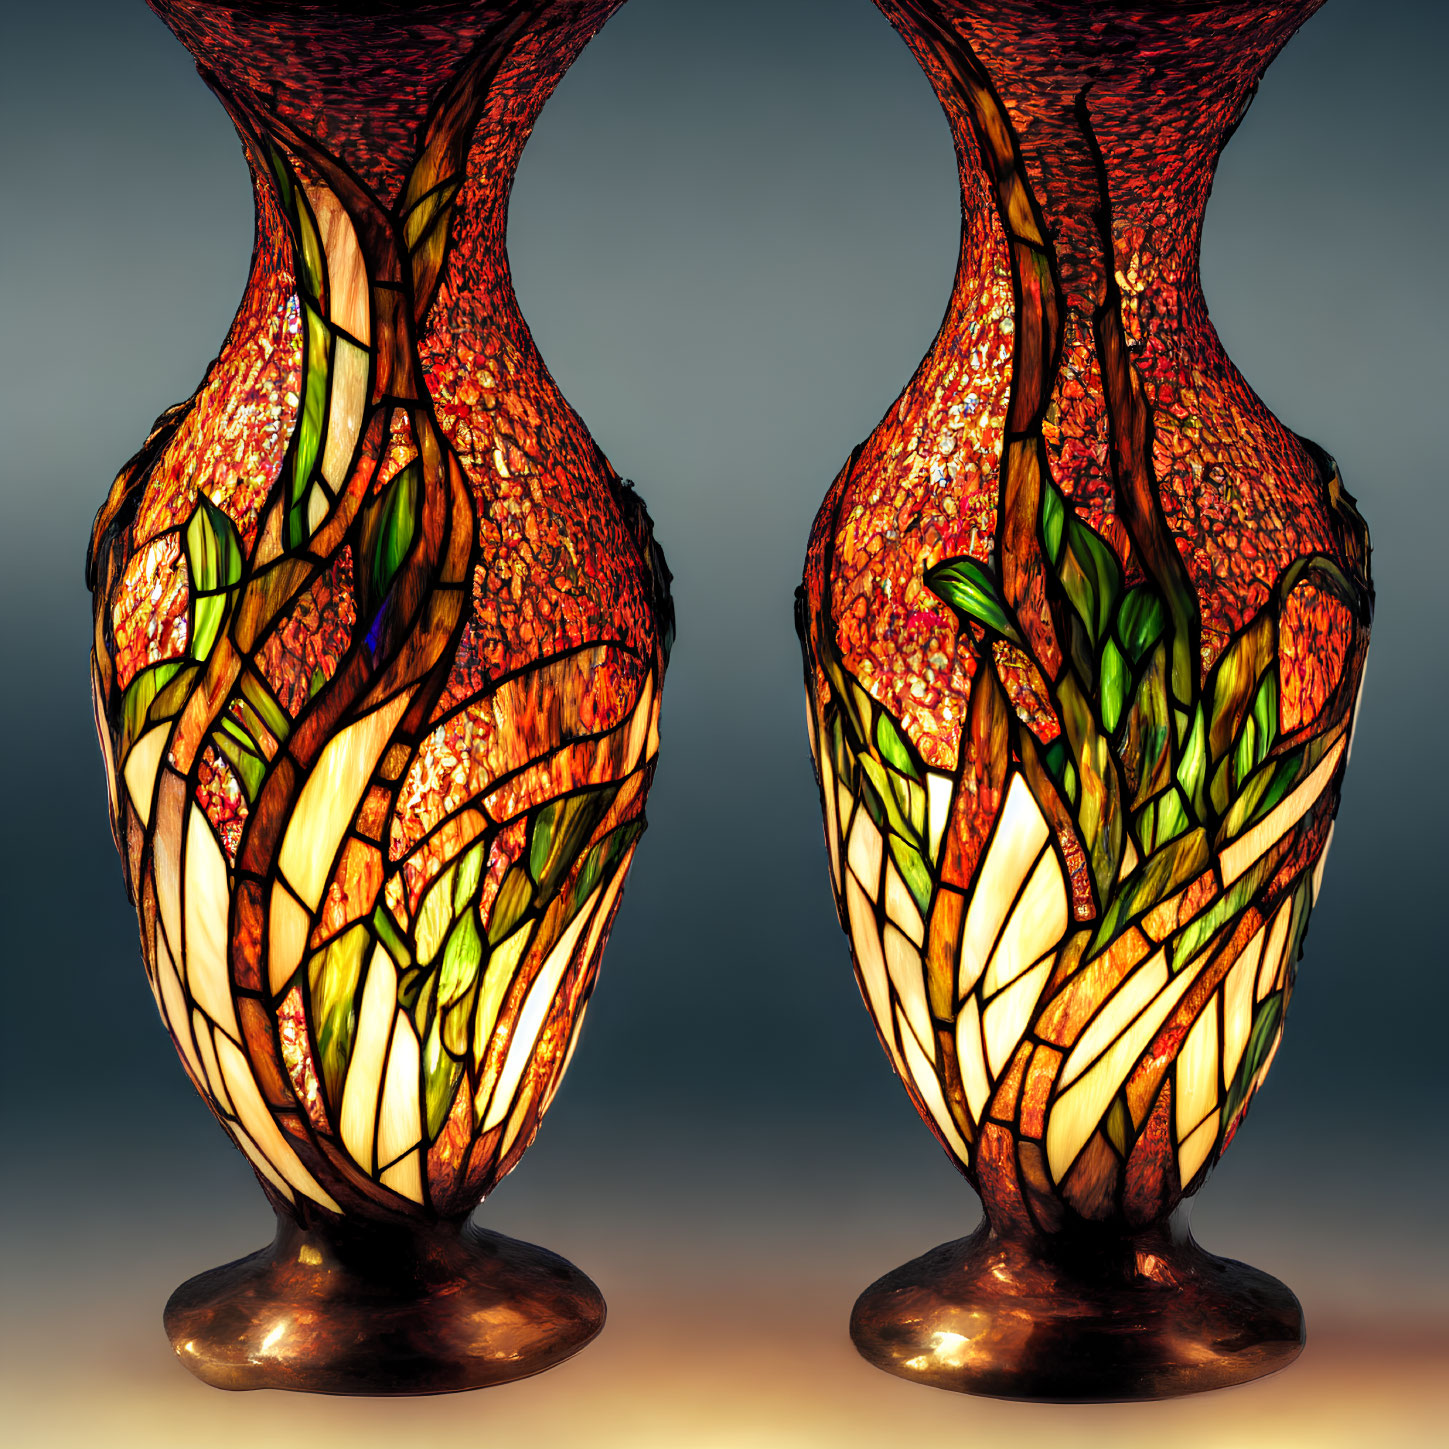 Symmetrical Tiffany-Style Stained Glass Vases with Leaf Designs